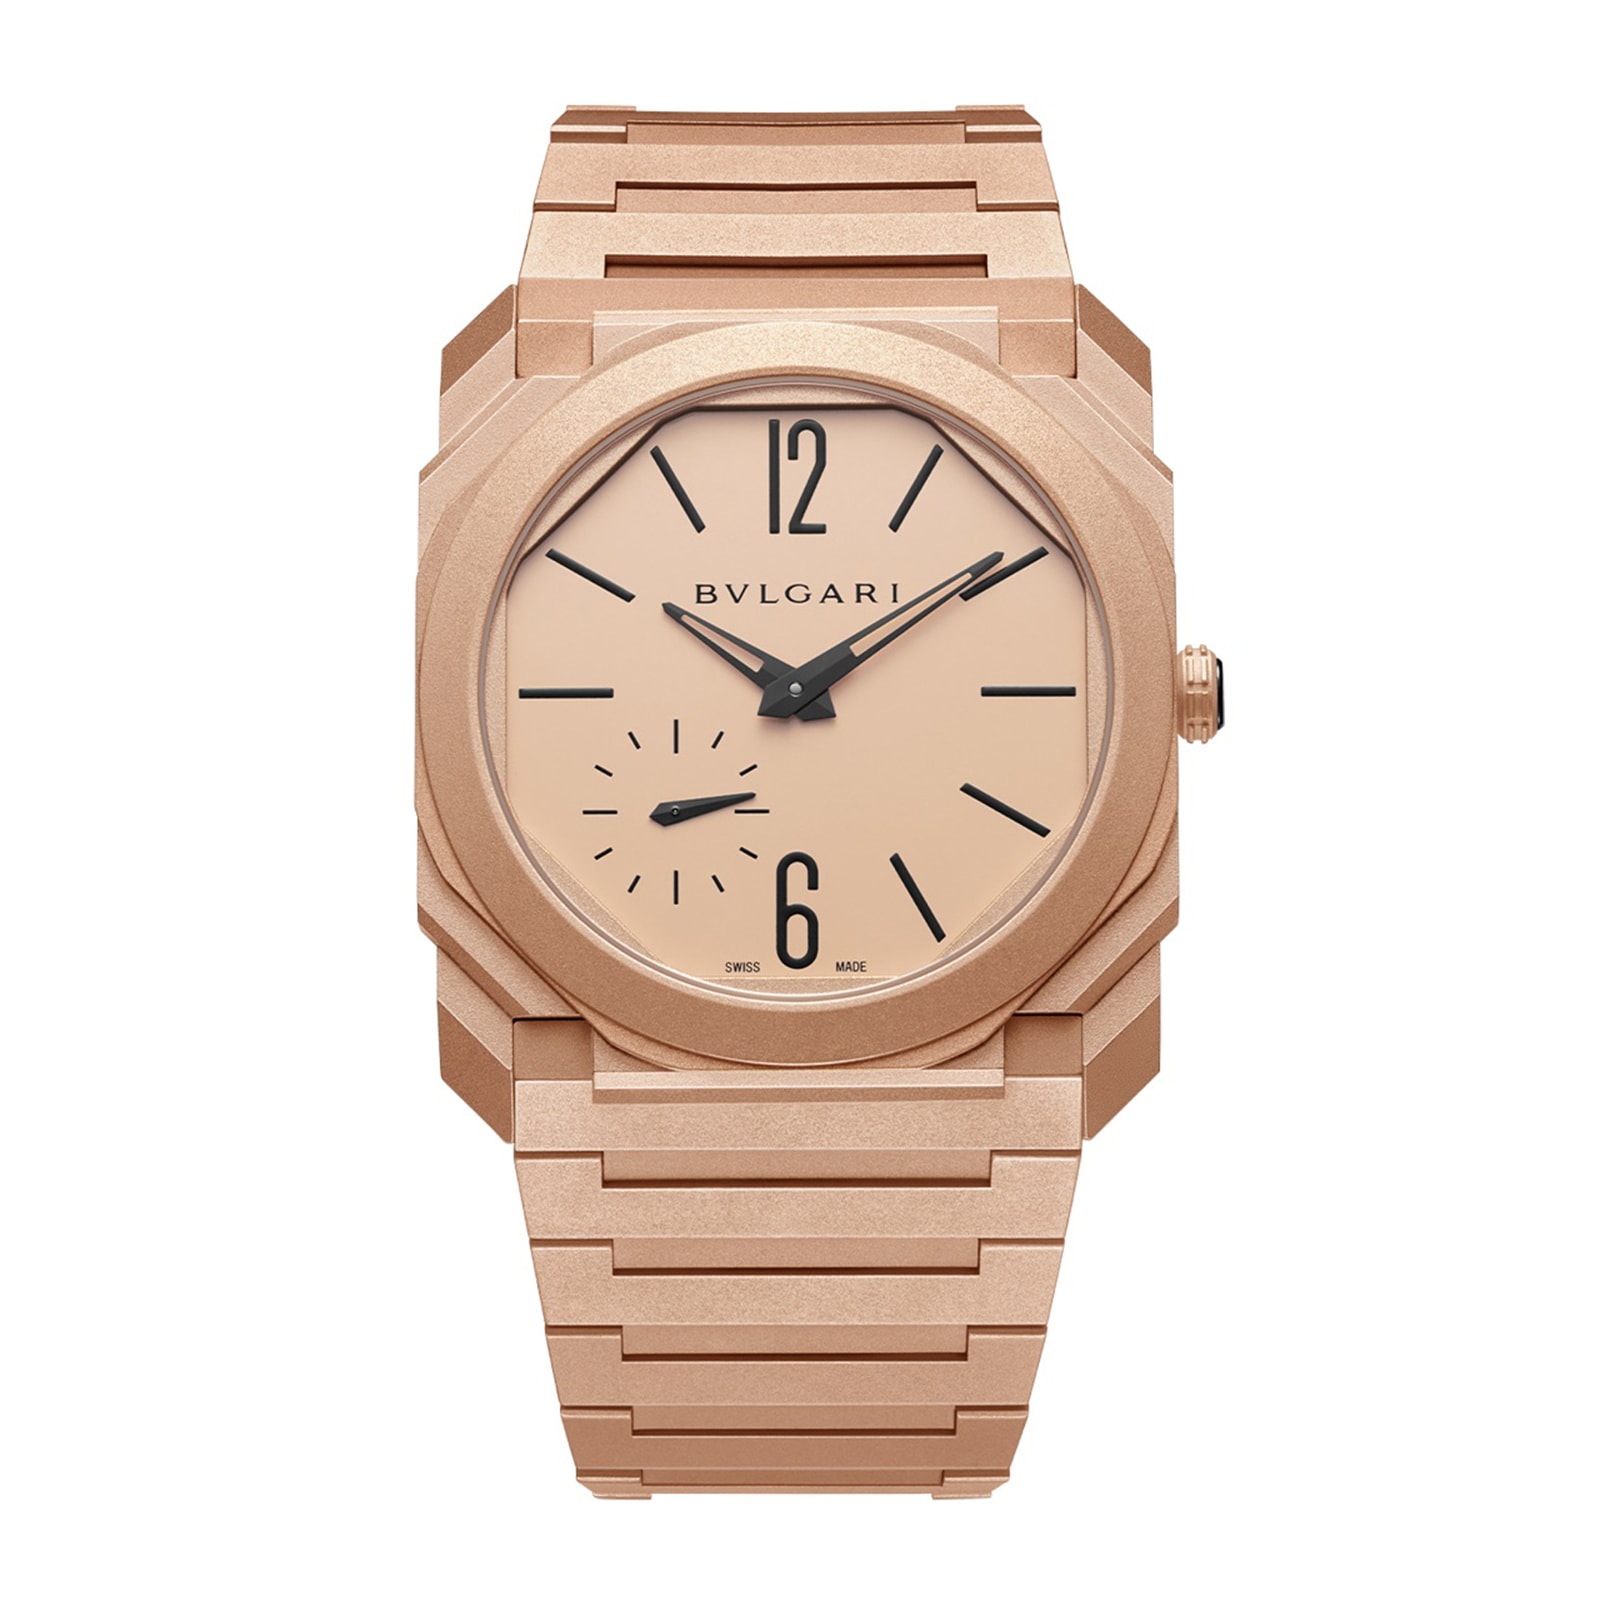 18k Rose Gold Octo Finissimo 40mm Auto Gents Watch